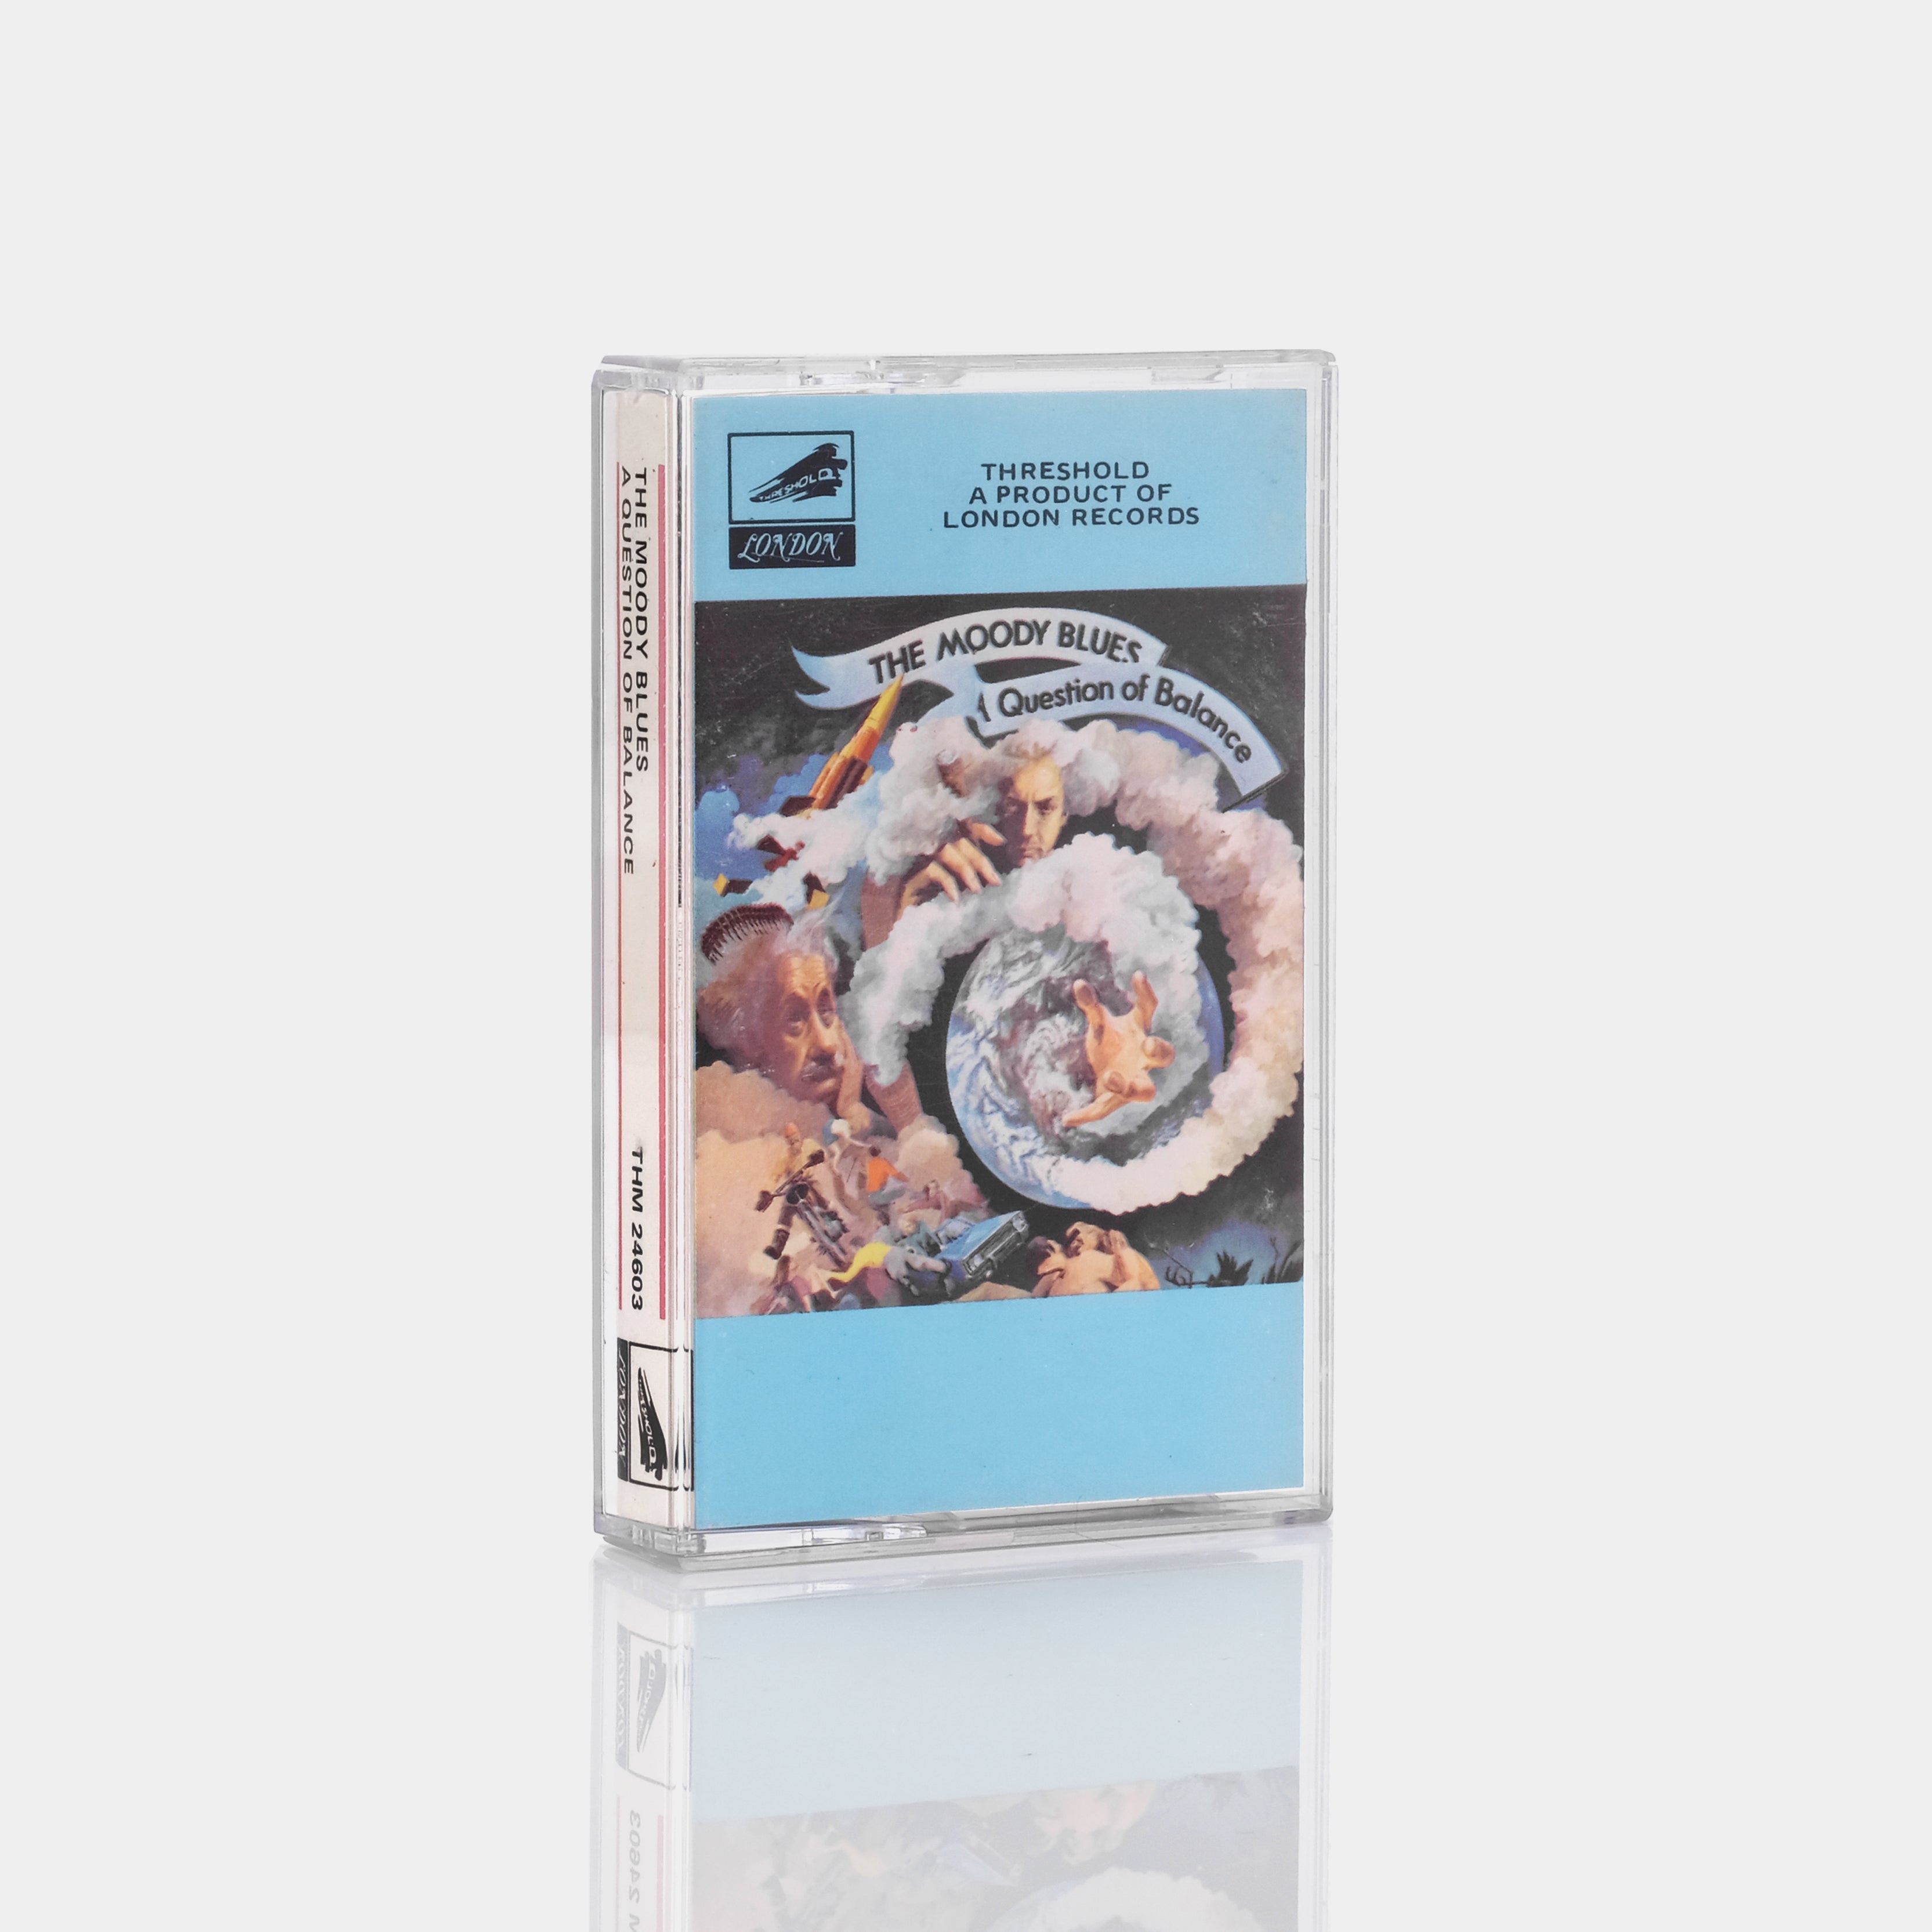 The Moody Blues - A Question Of Balance Cassette Tape